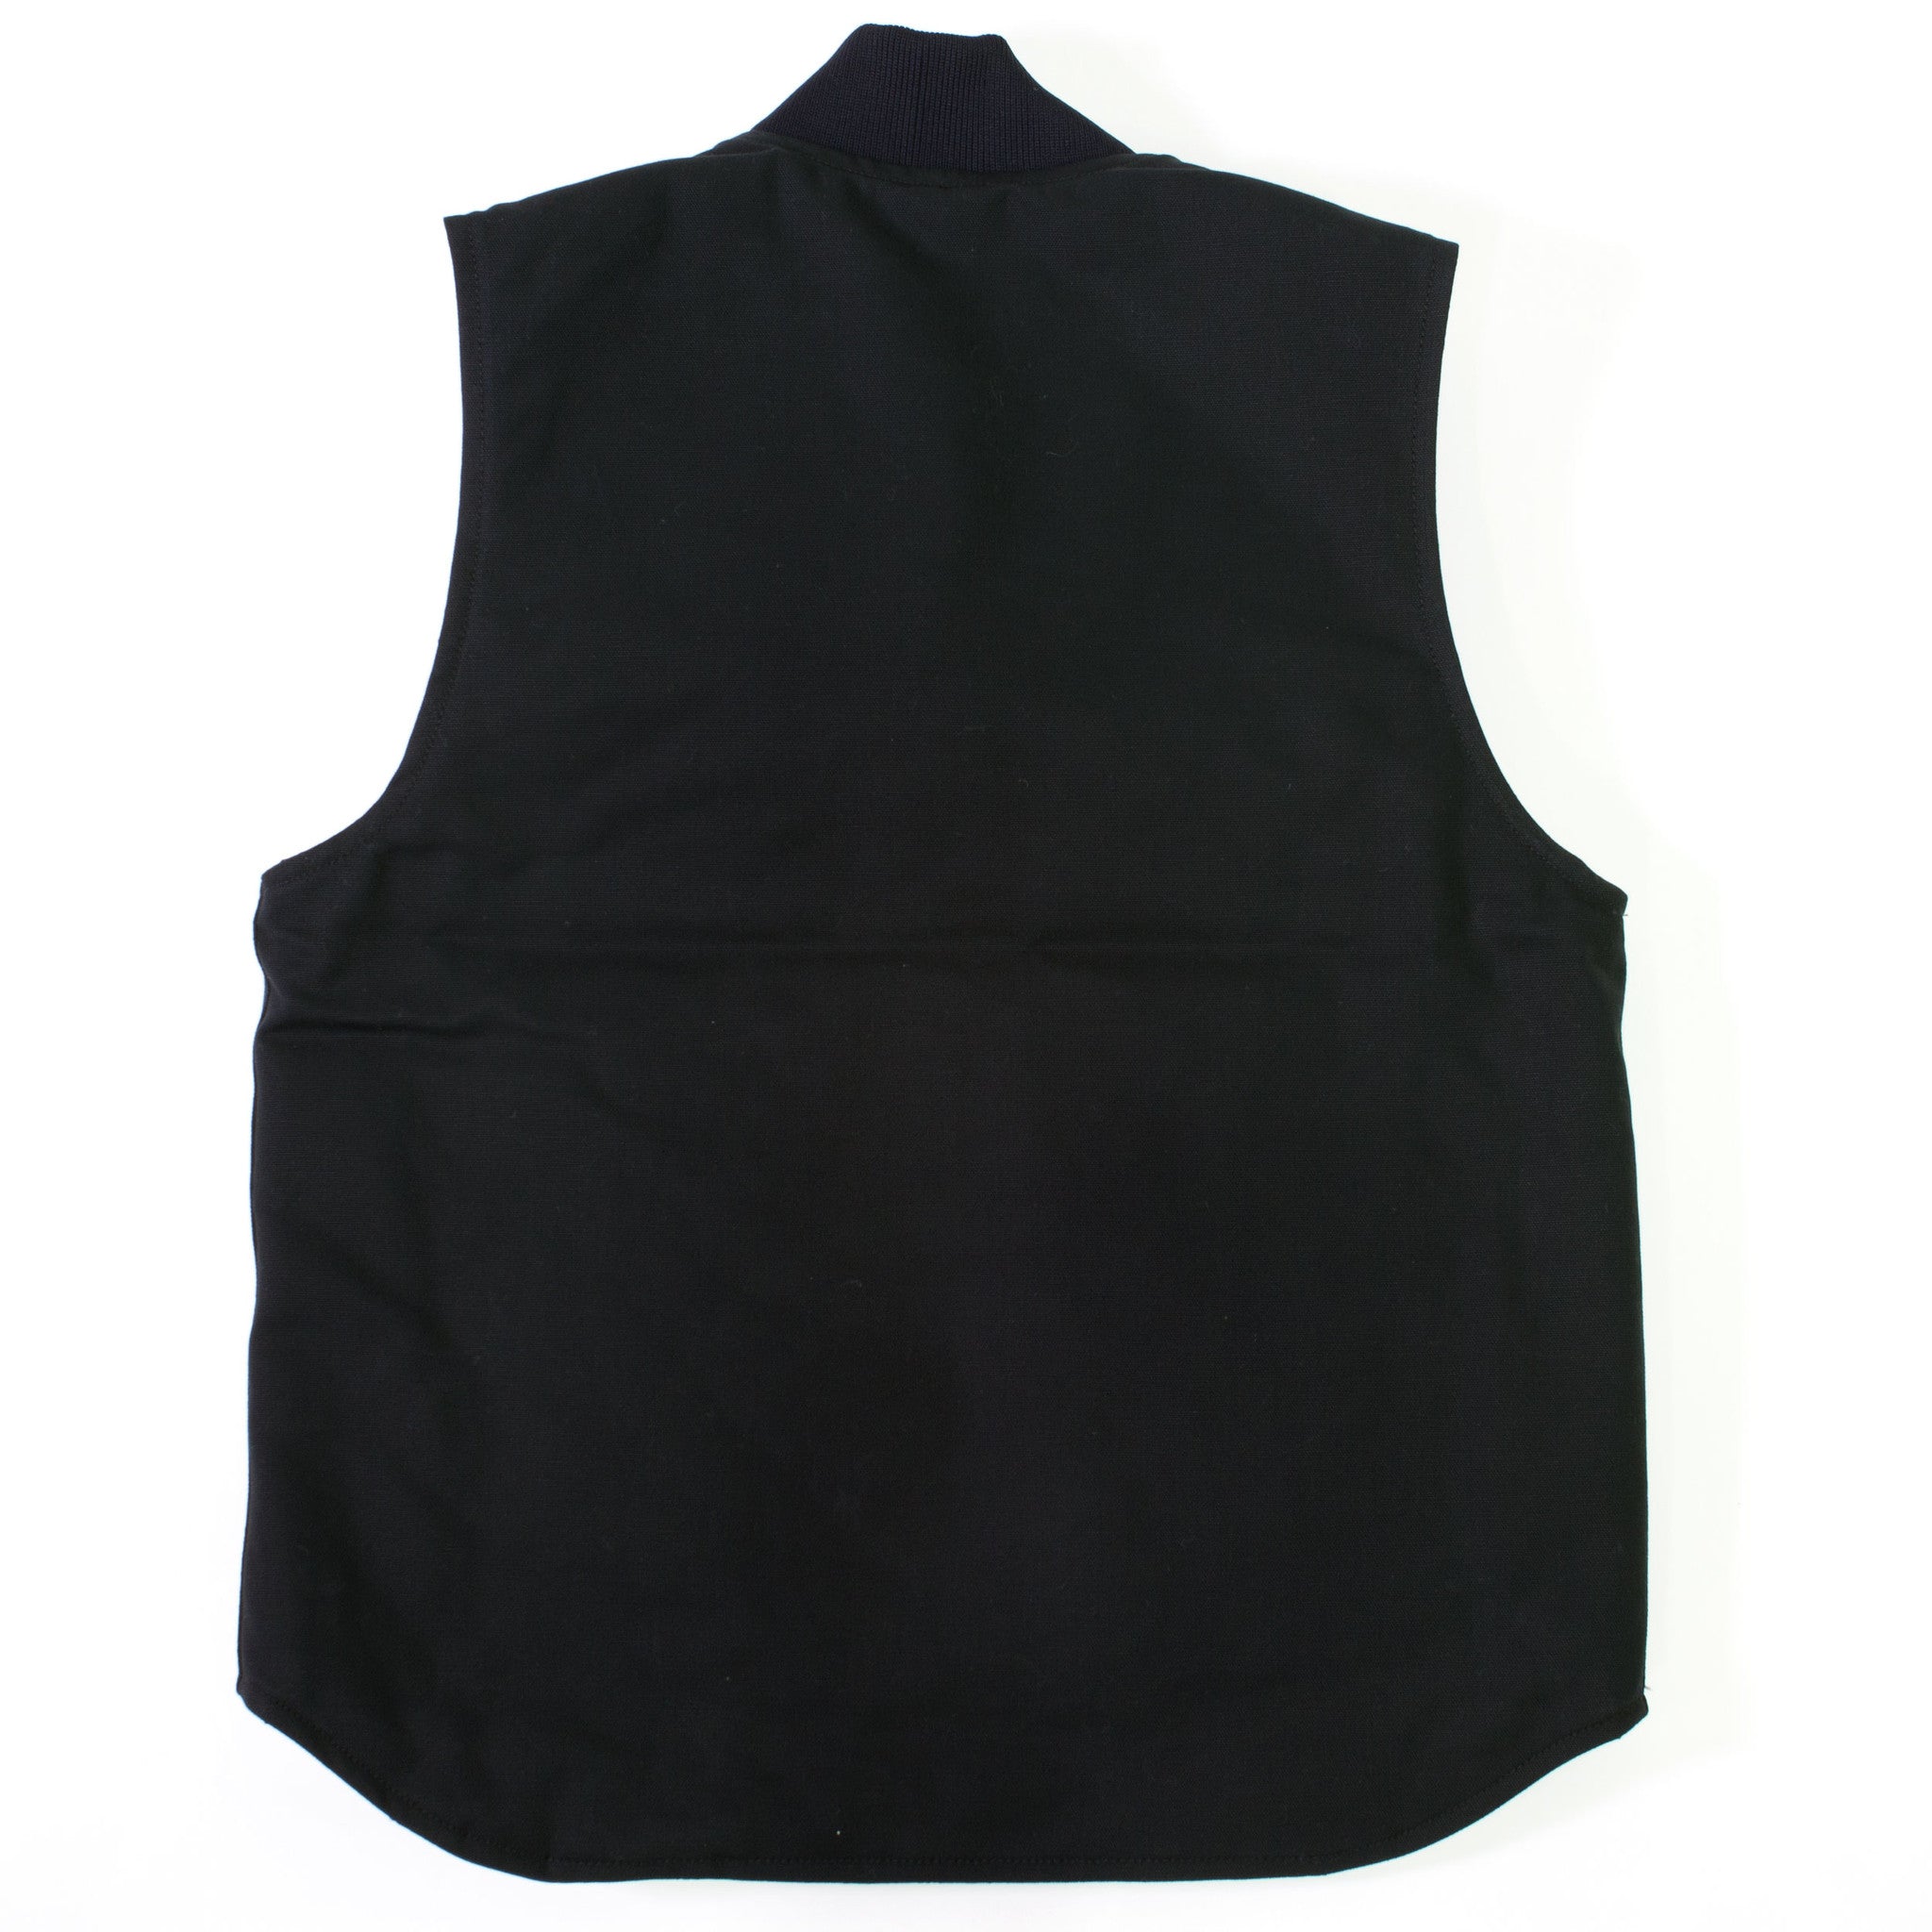 Limited Quantity Available! - Ural Carhartt Vest - Ural Motorcycles